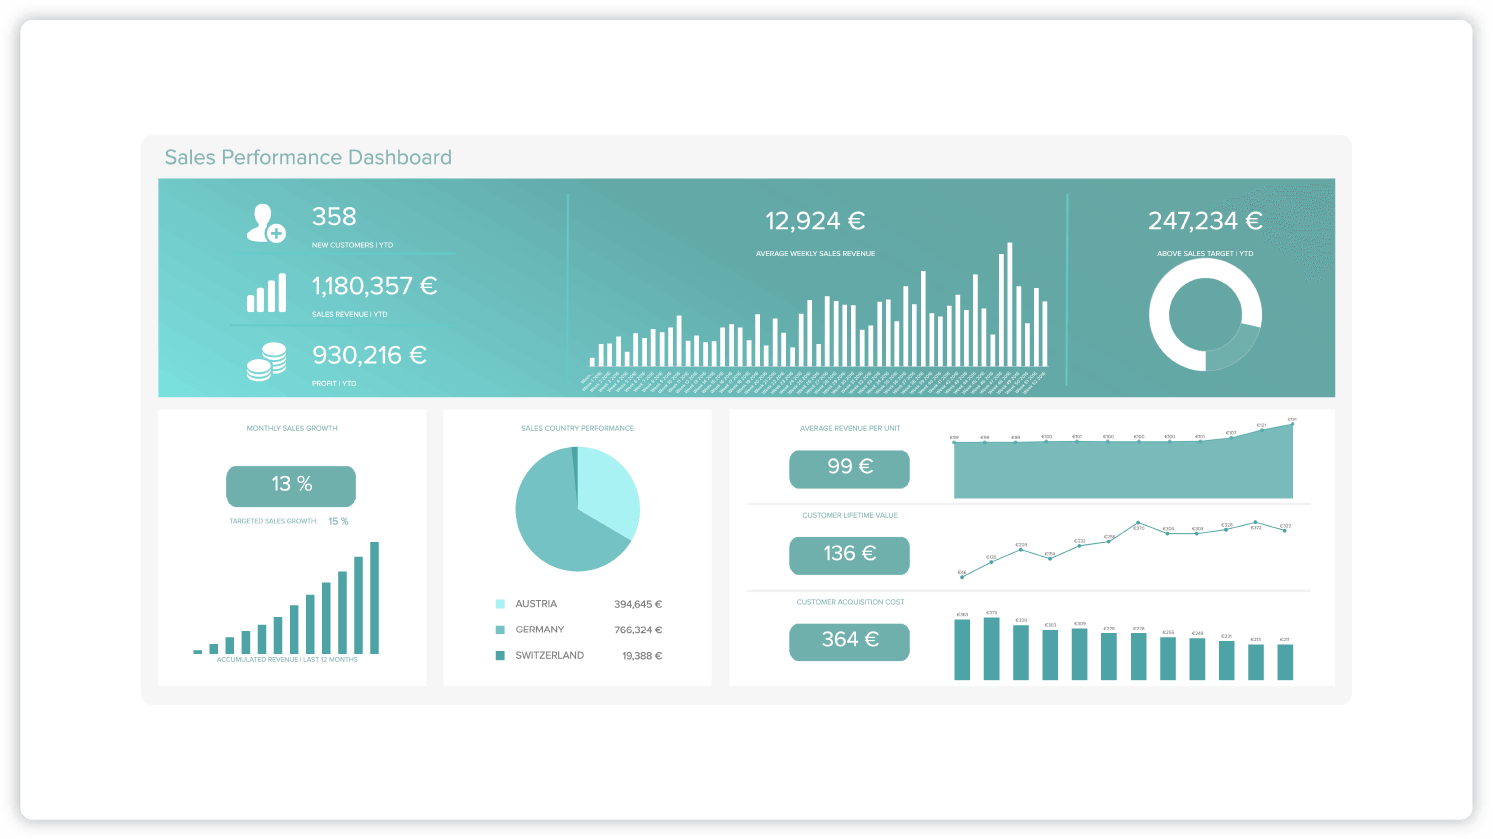 Sales performance dashboard showing average monthly sales revenue, monthly sales growth, average revenues per unit, customer lifetime value all represented in bar graphs and pie charts